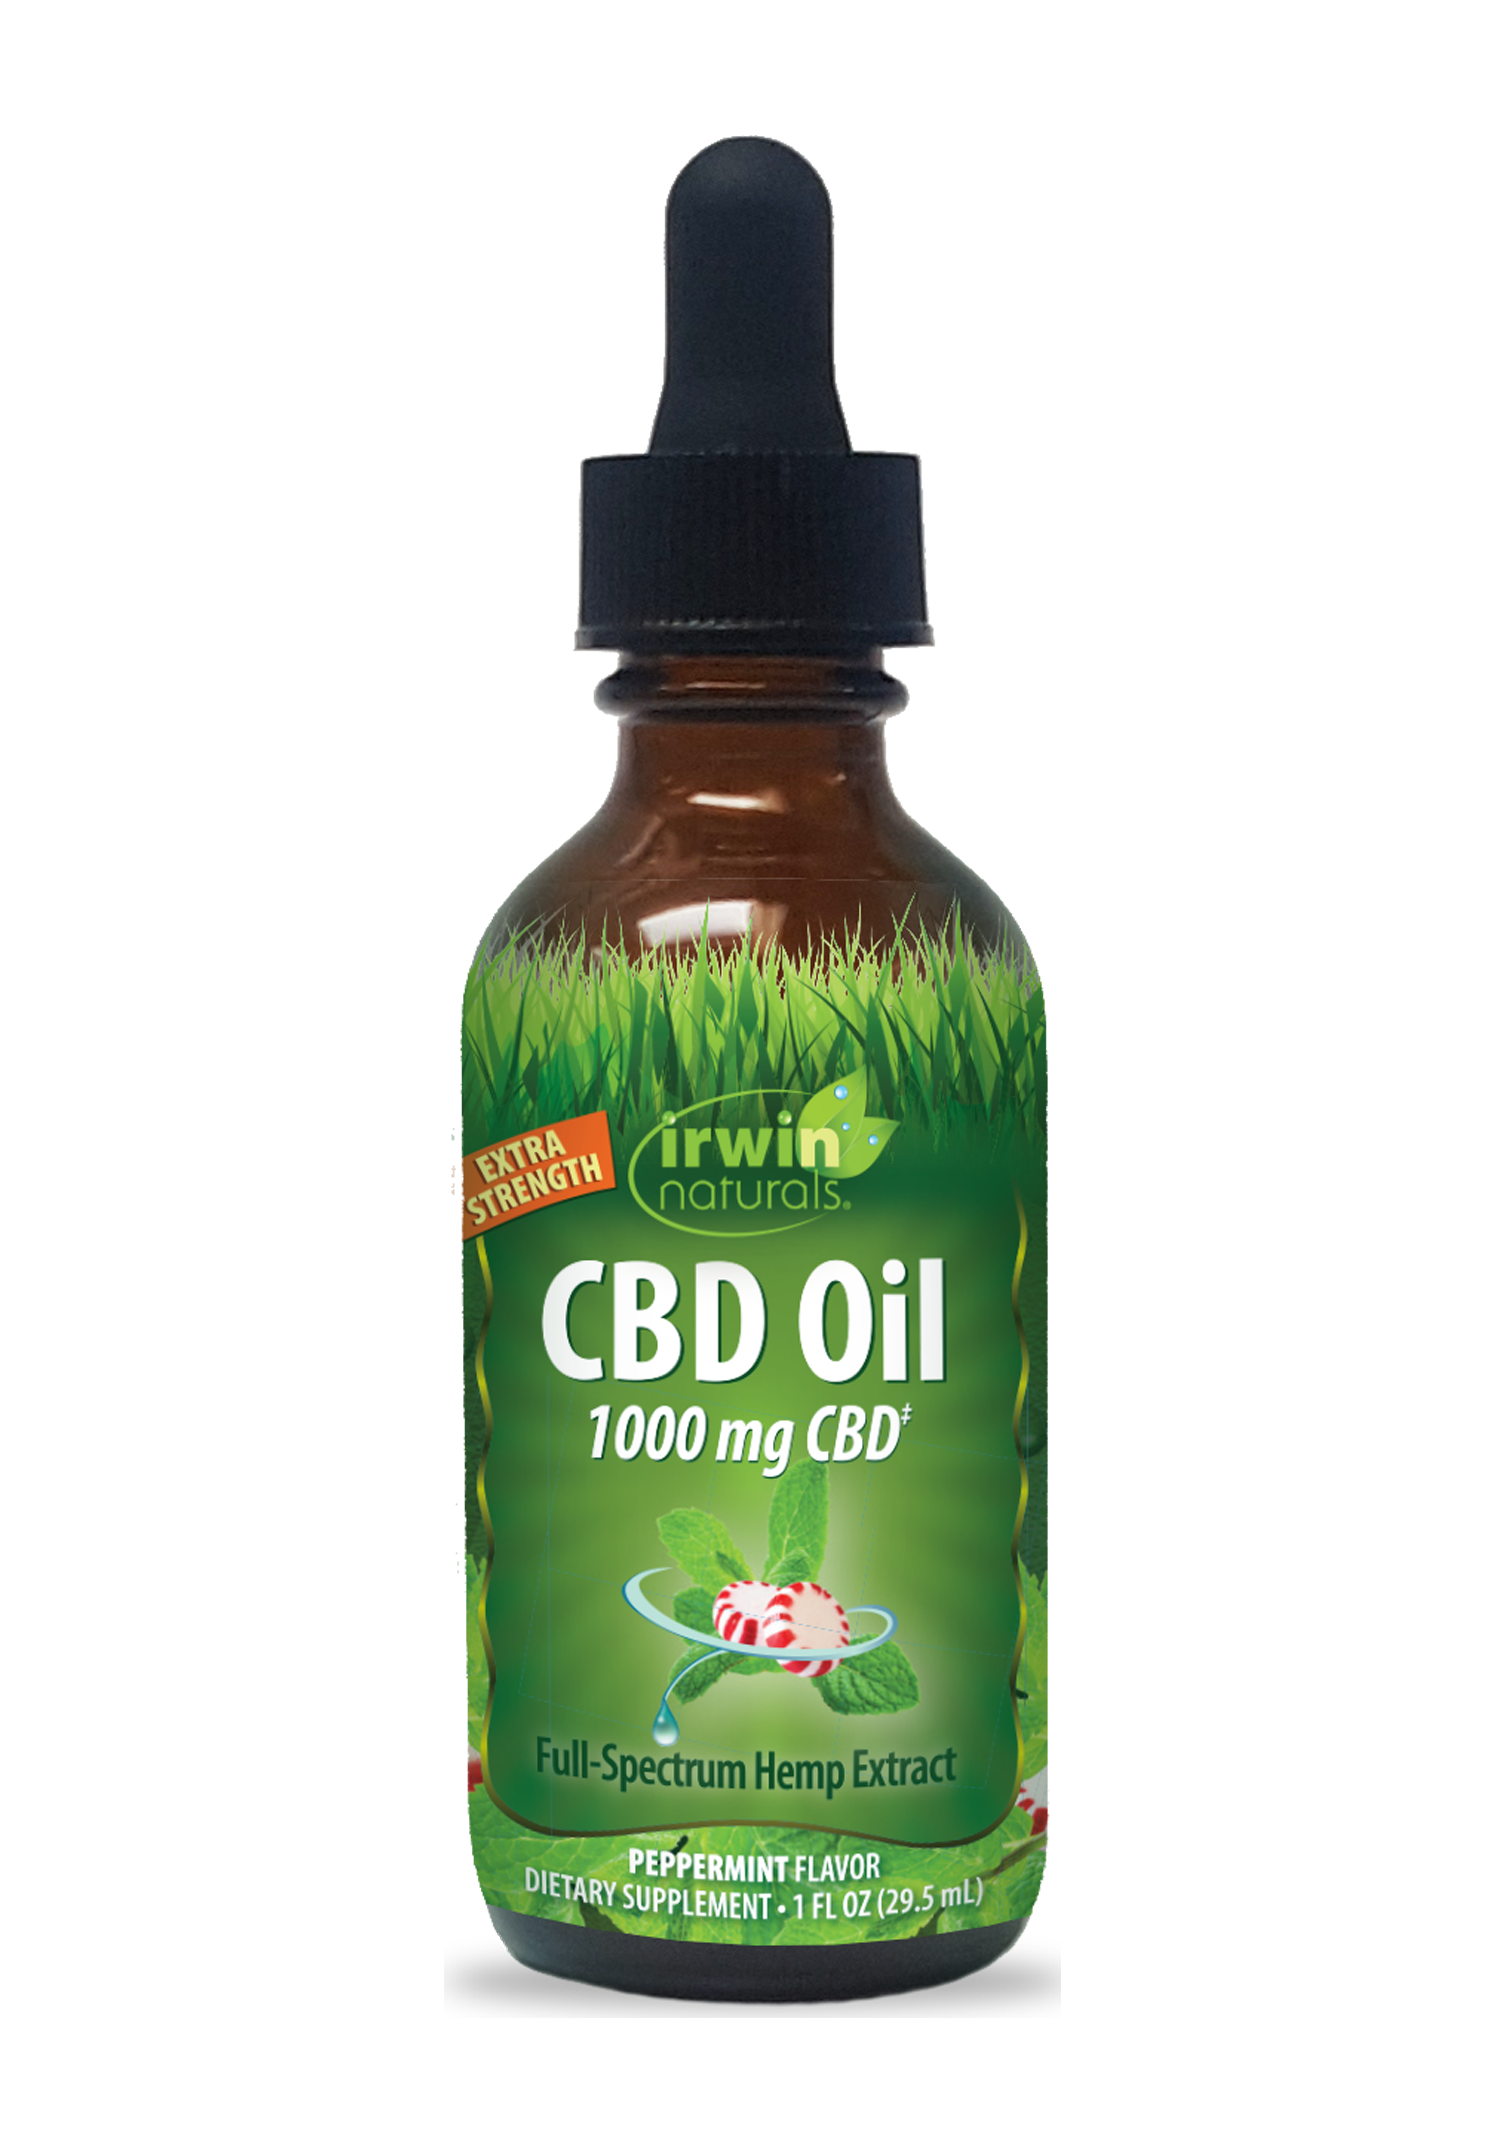 How Cbd Shown To Ease Anxiety Without The Risks That Can Come ... can Save You Time, Stress, and Money. 1